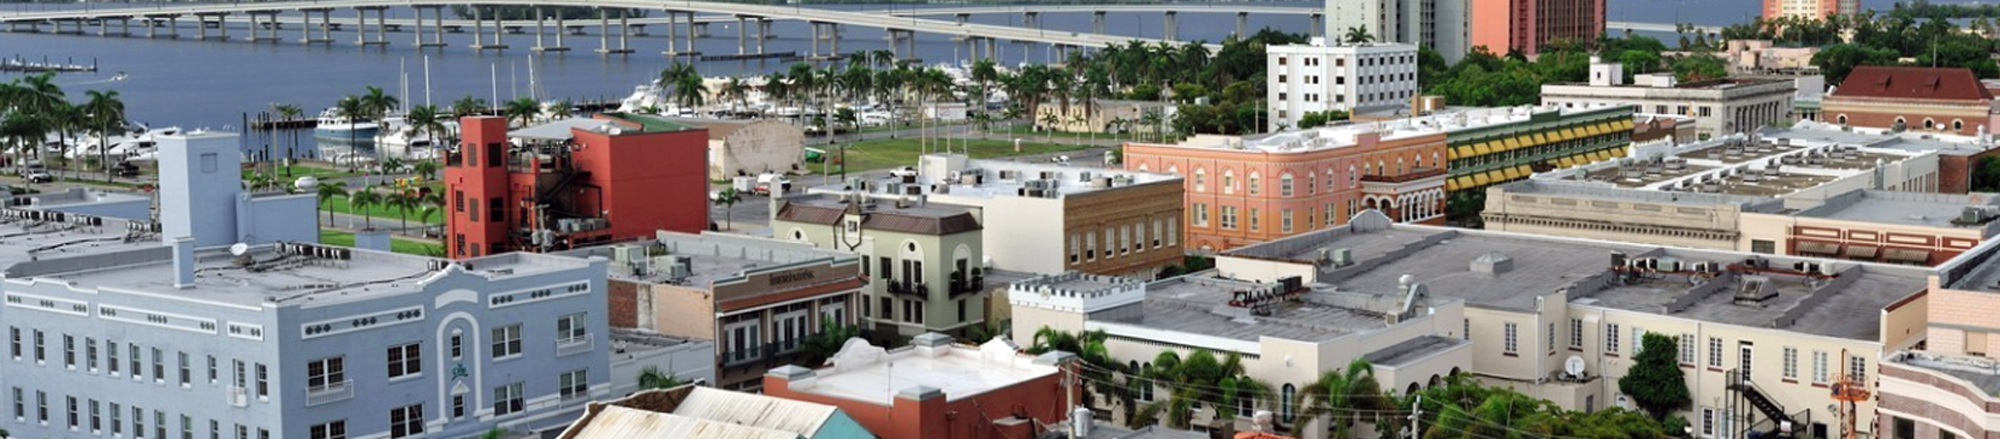 header image - downtown Fort Myers